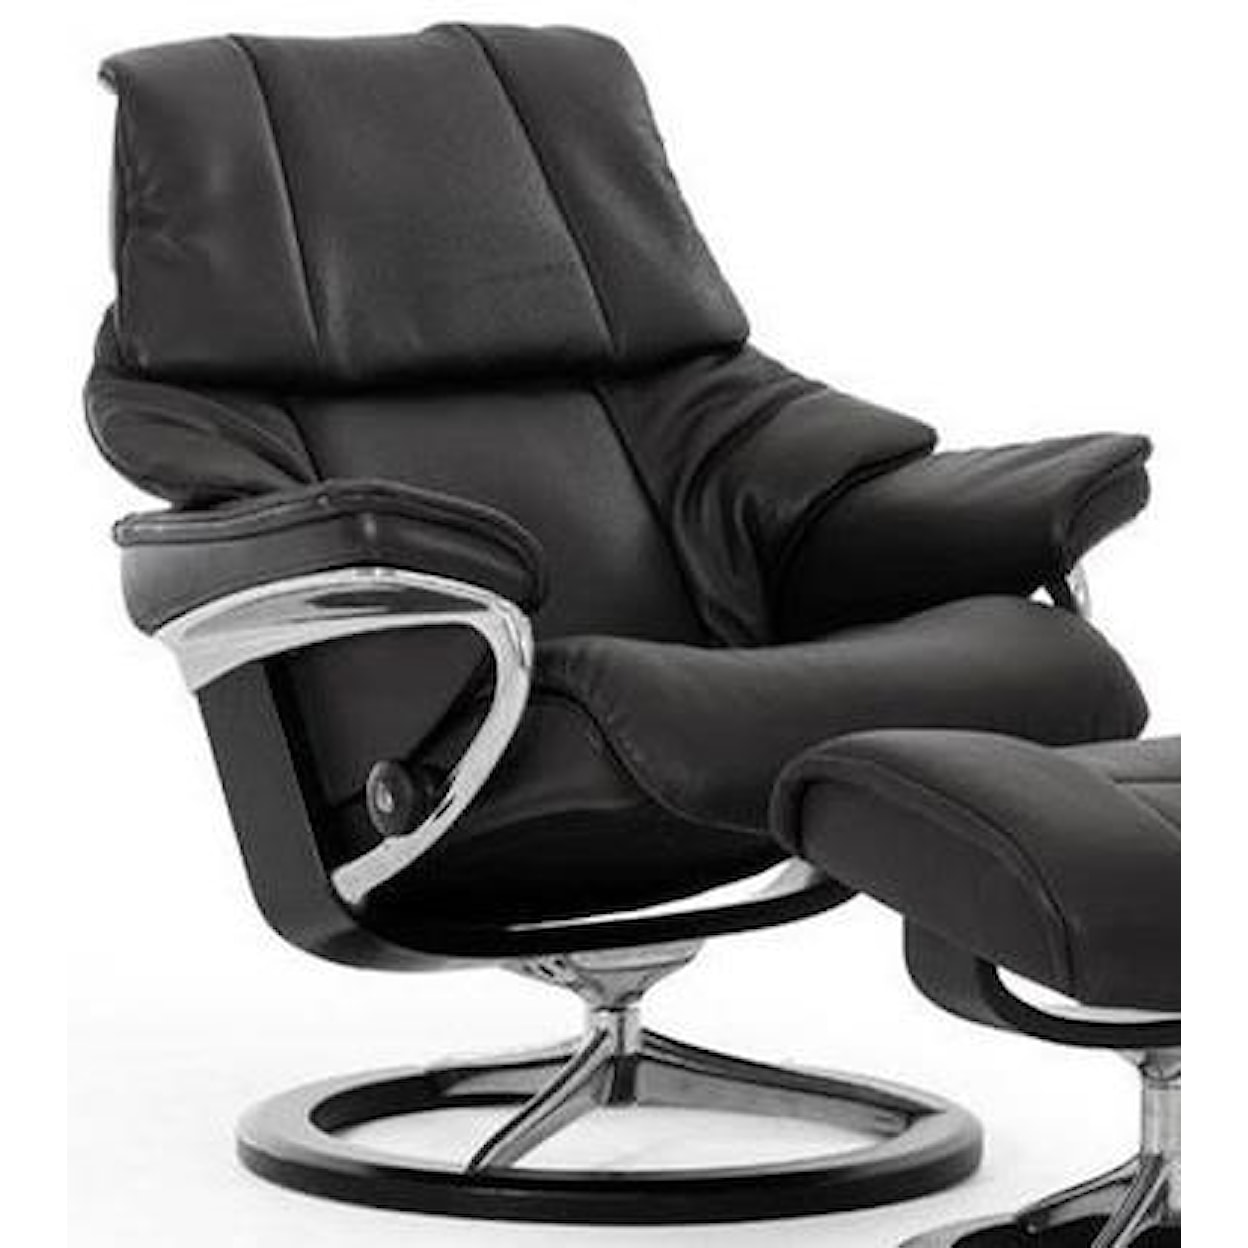 Stressless by Ekornes Reno Large Reclining Chair with Signature Base